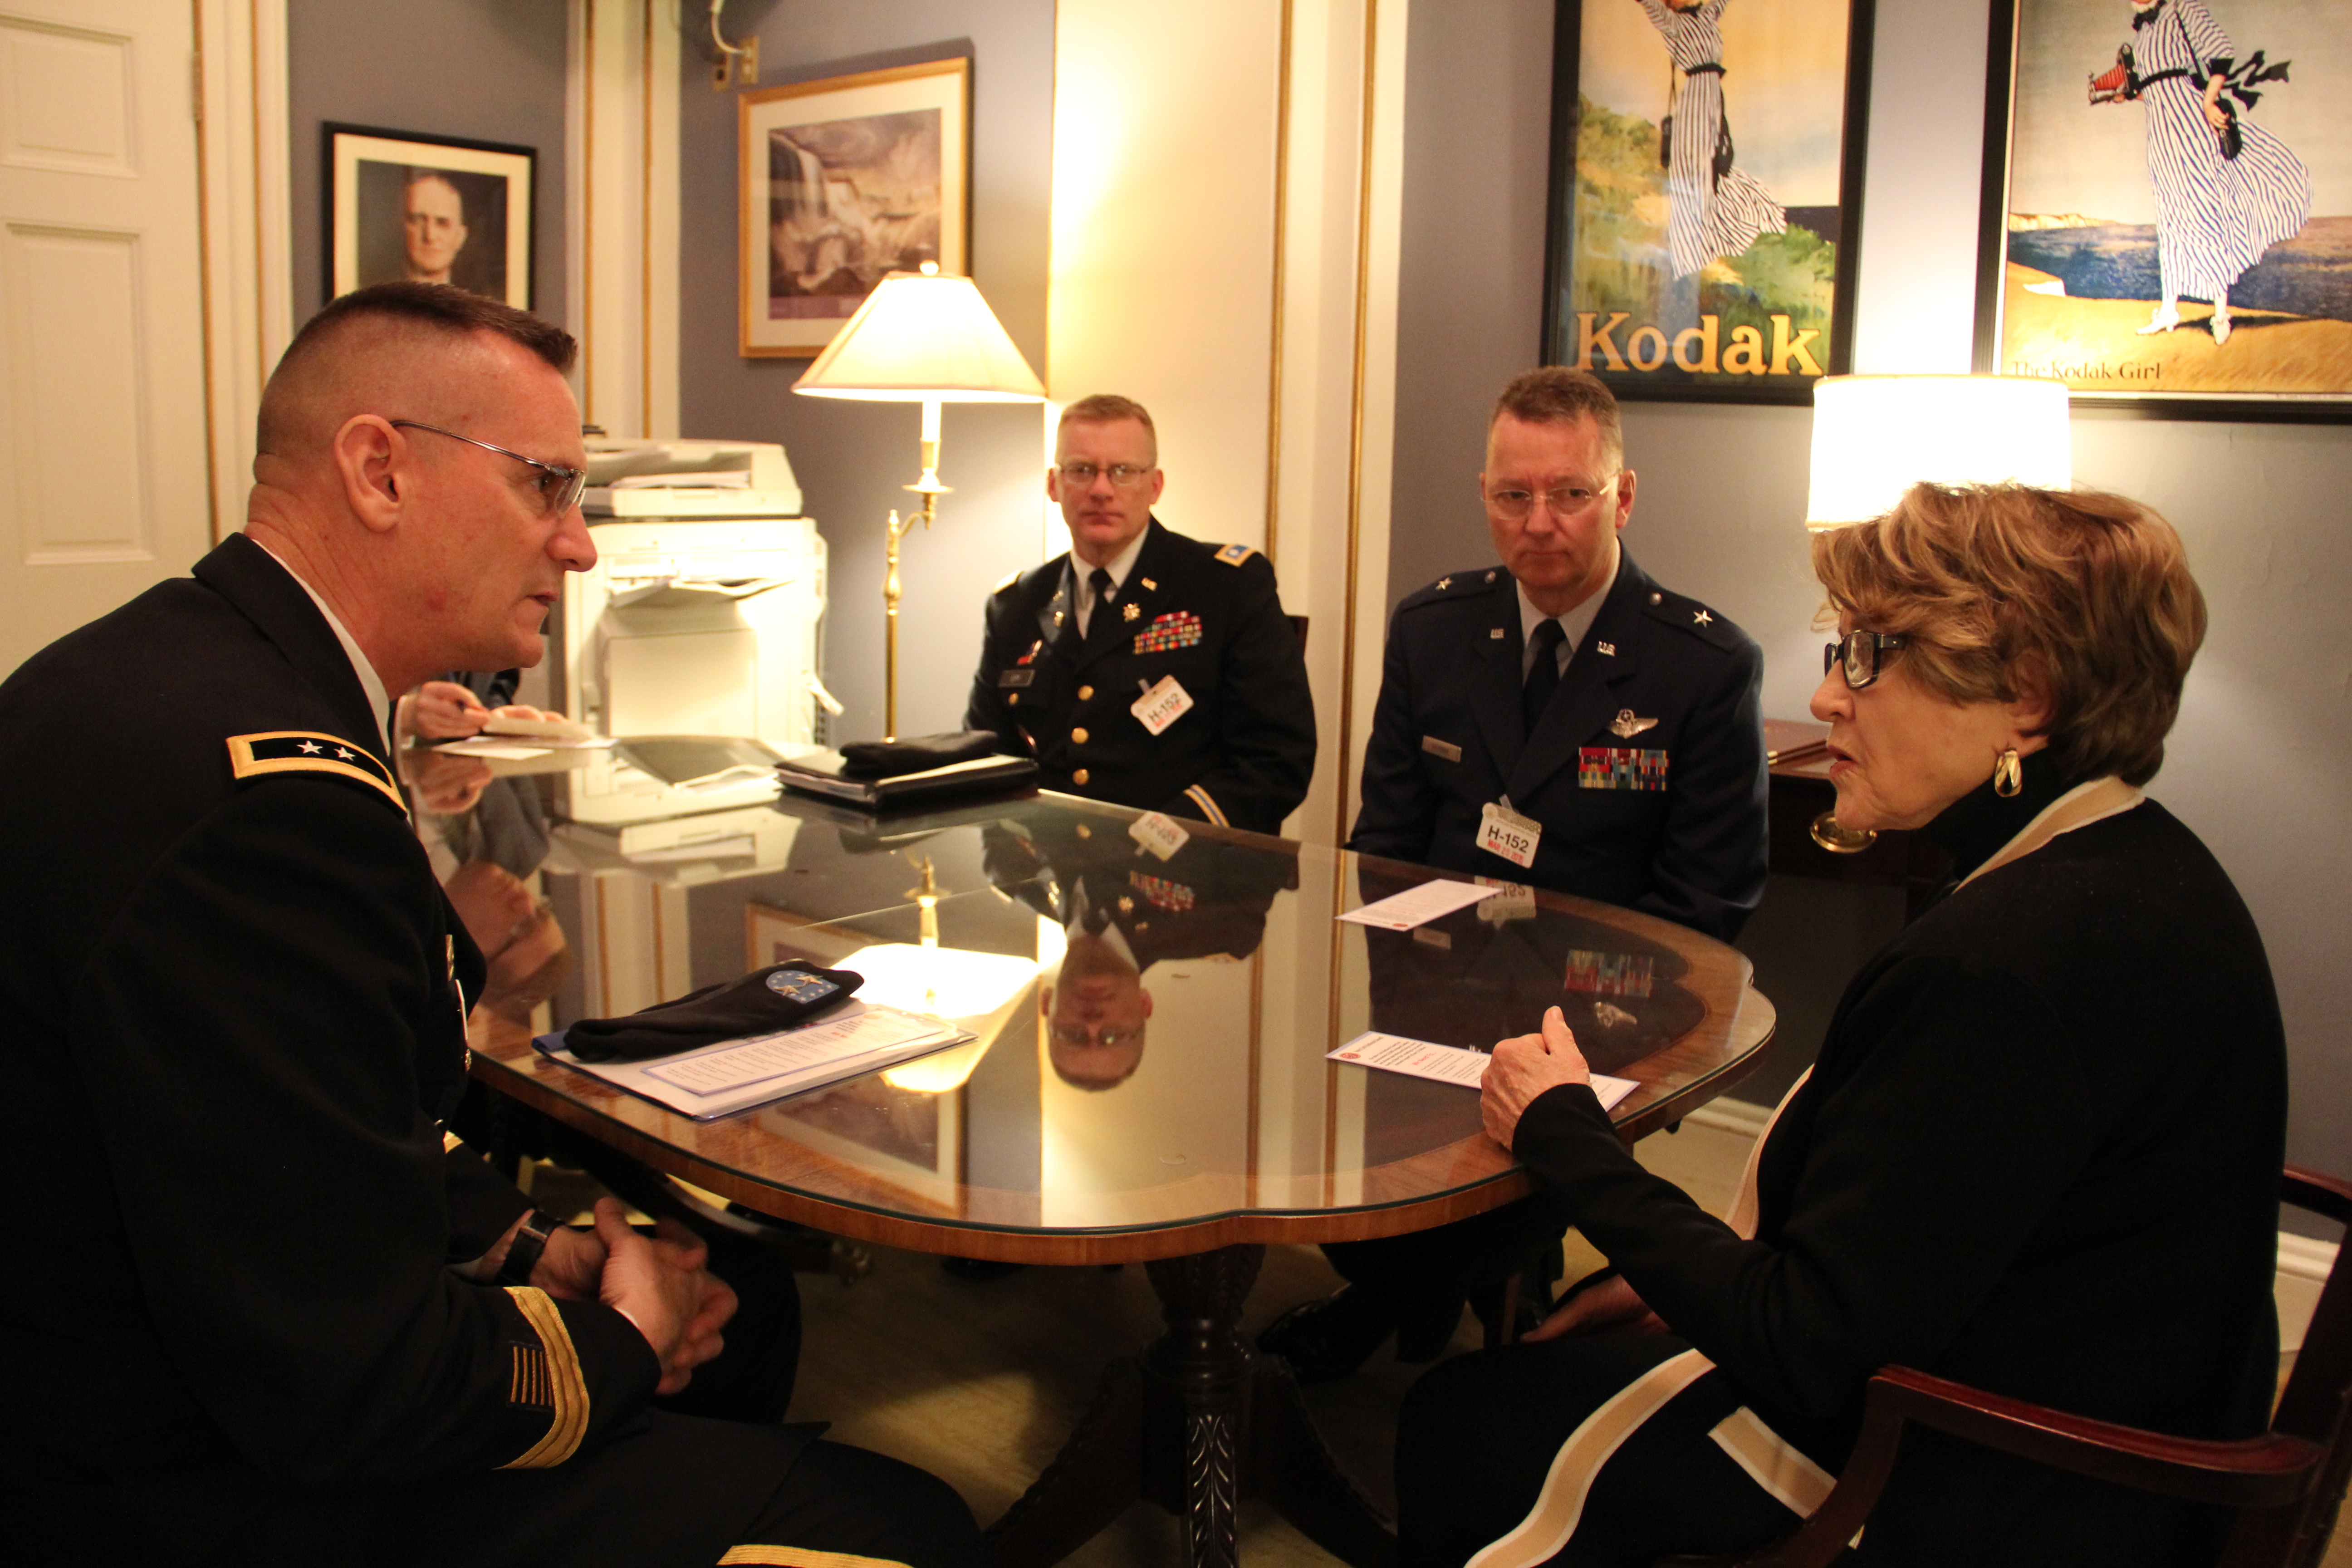 Rep. Louise Slaughter meets with members of the New York Army National Guard